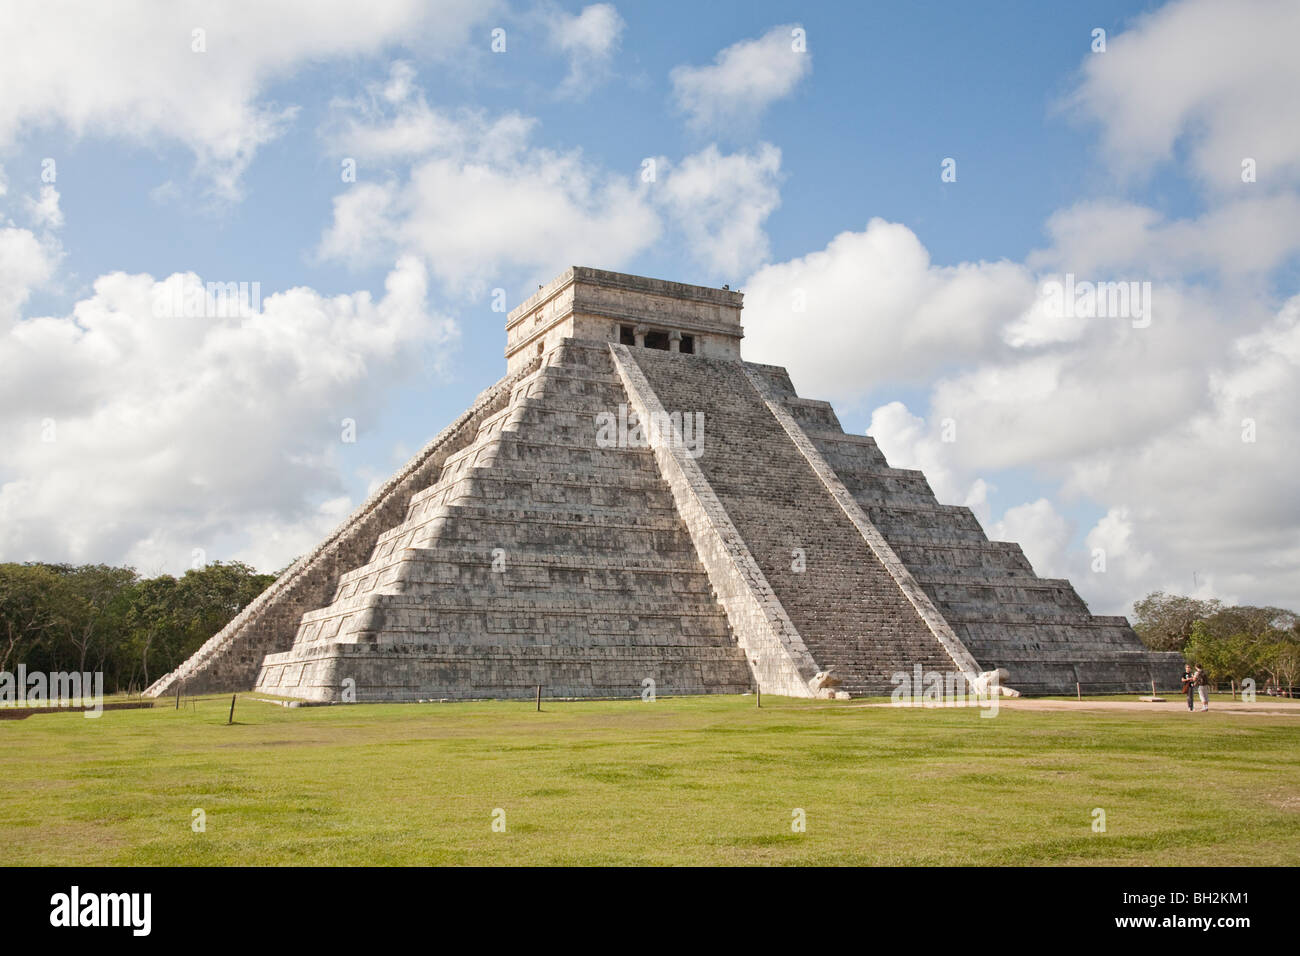 The Castle or Pyramid of Kukulcan. Chichen Itza Archaeological Site Yucatan Mexico. Stock Photo